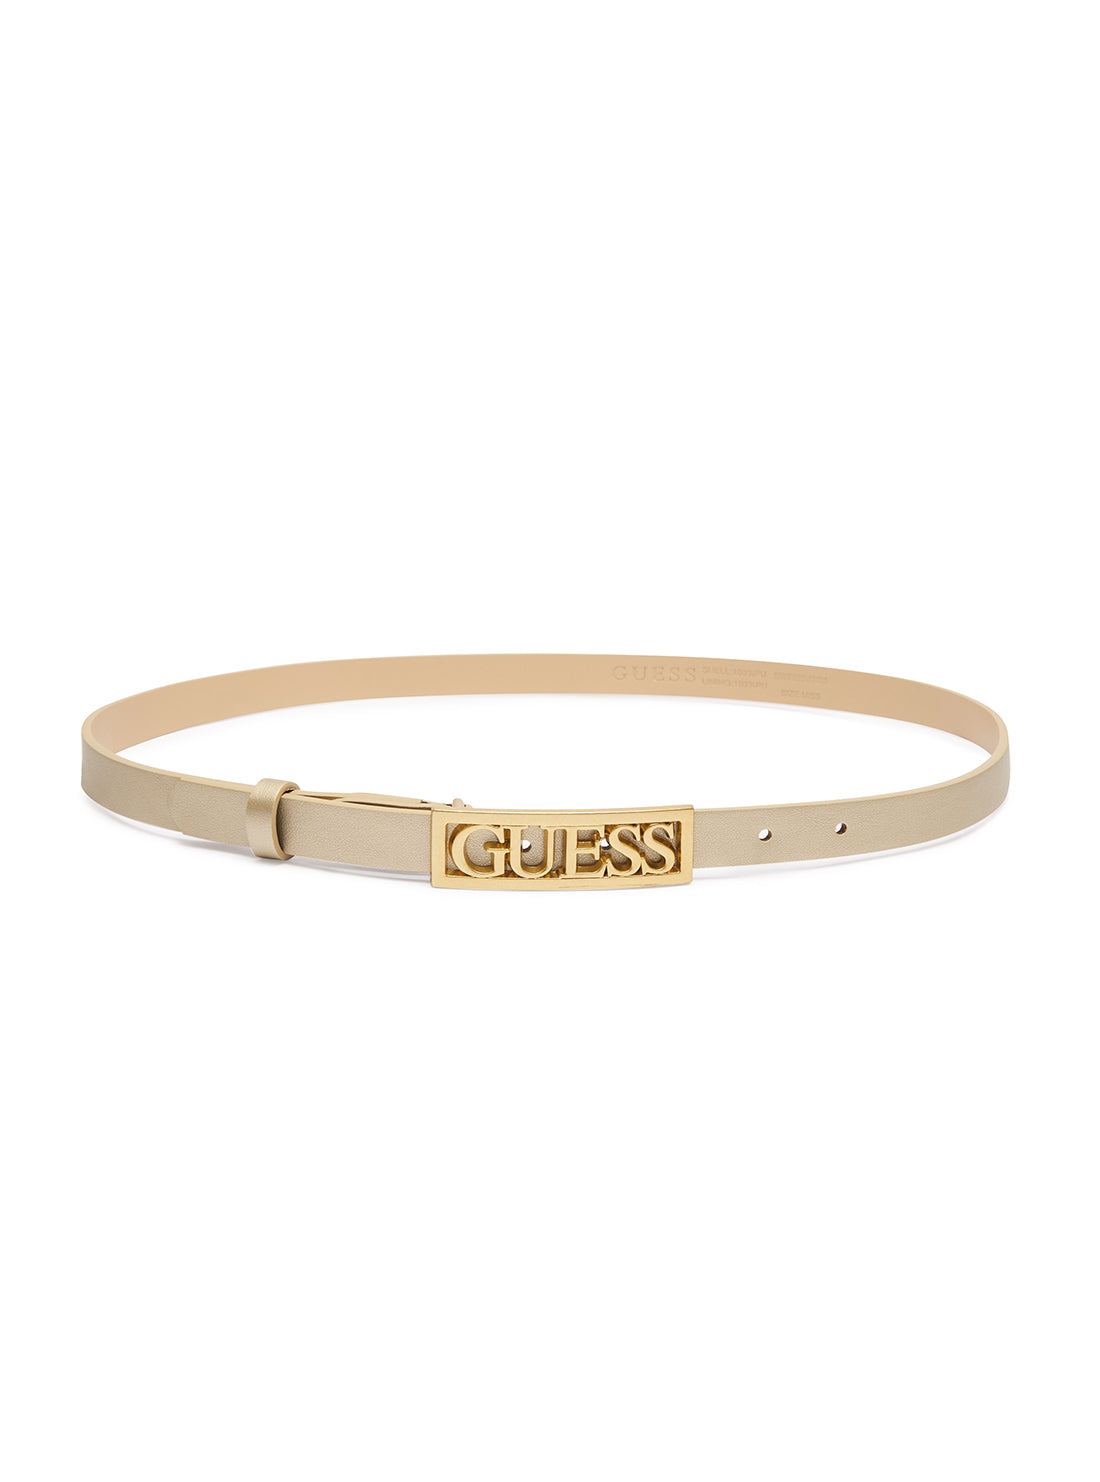 GUESS Gold Mildred Adjustable Belt full view